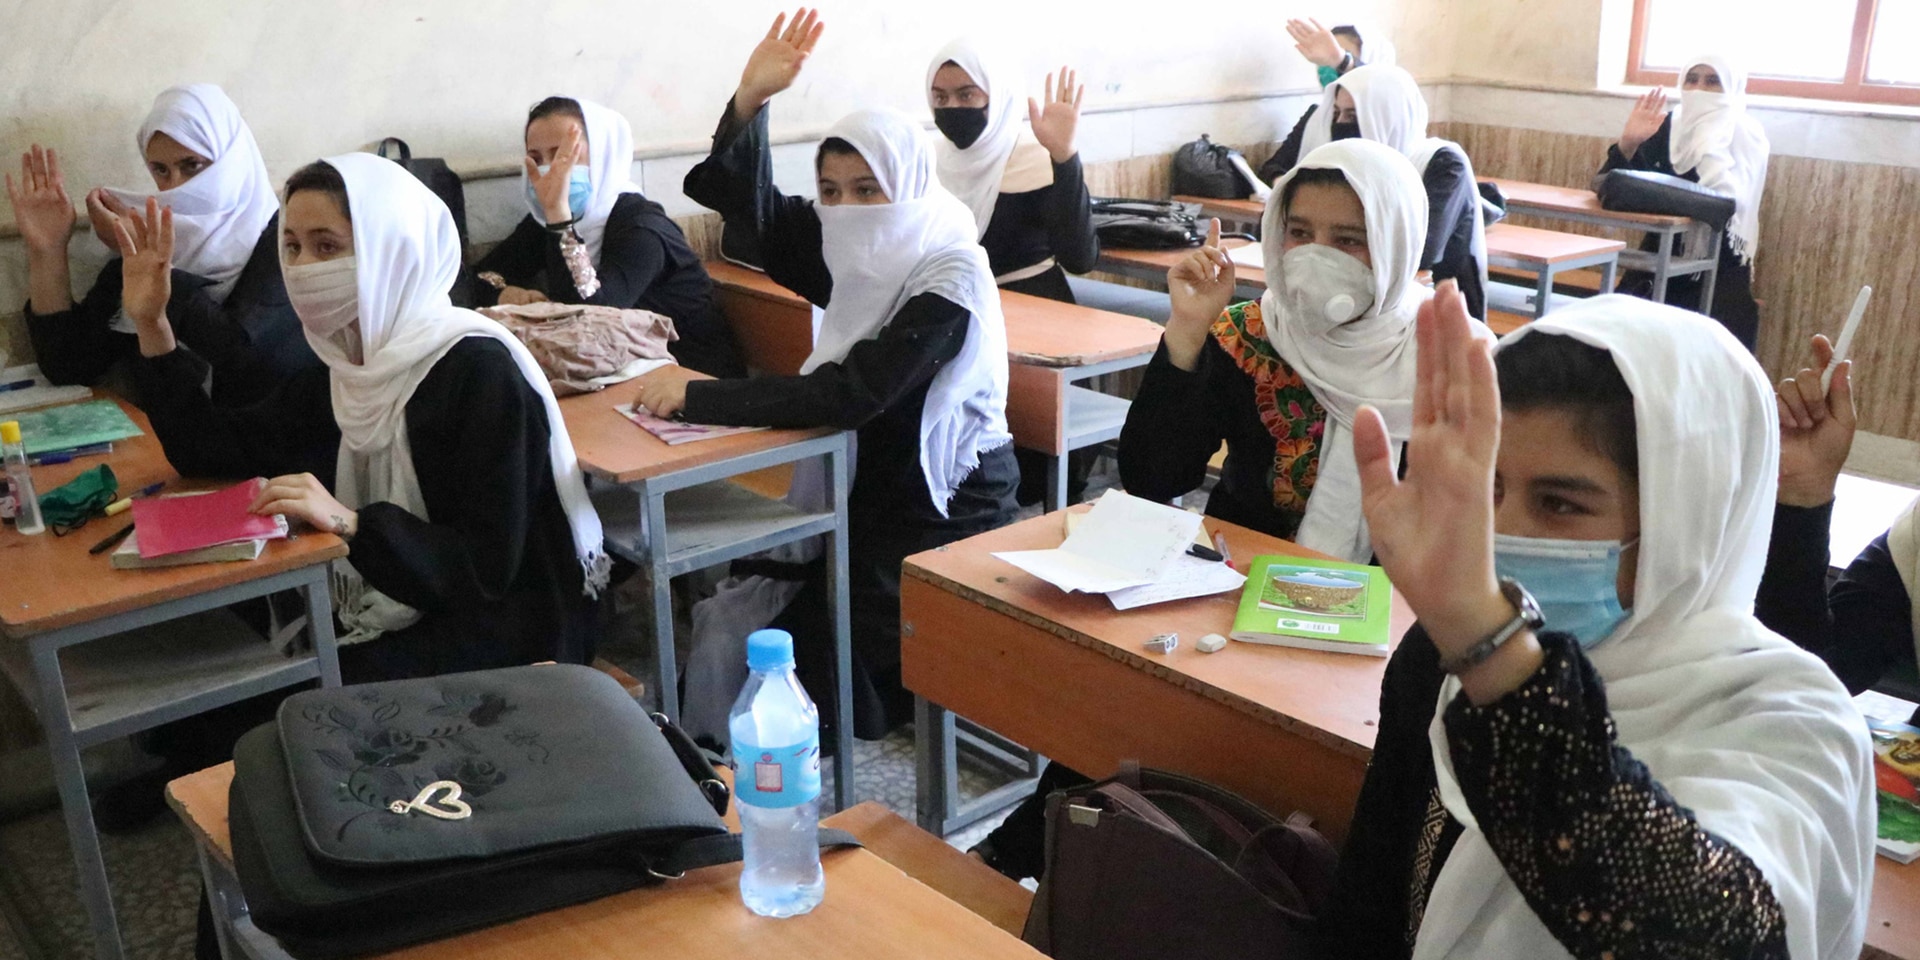  A classroom in Afghanistan where girls put their hands up to answer a question.